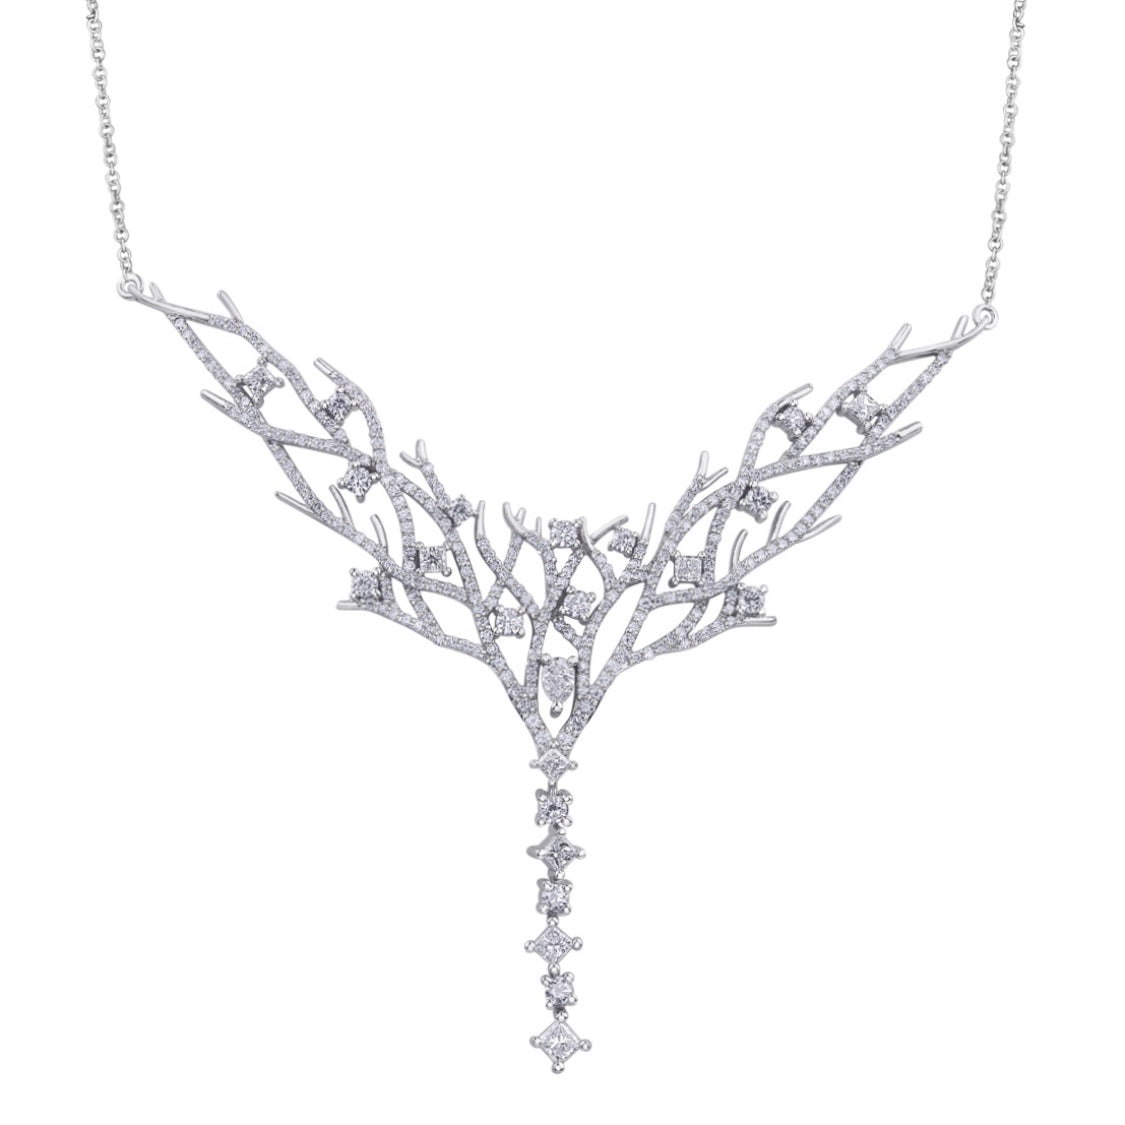 Crafted in 14KT white Certified Canadian Gold, this necklace features a winter branch design set with round brilliant-cut Canadian diamonds.